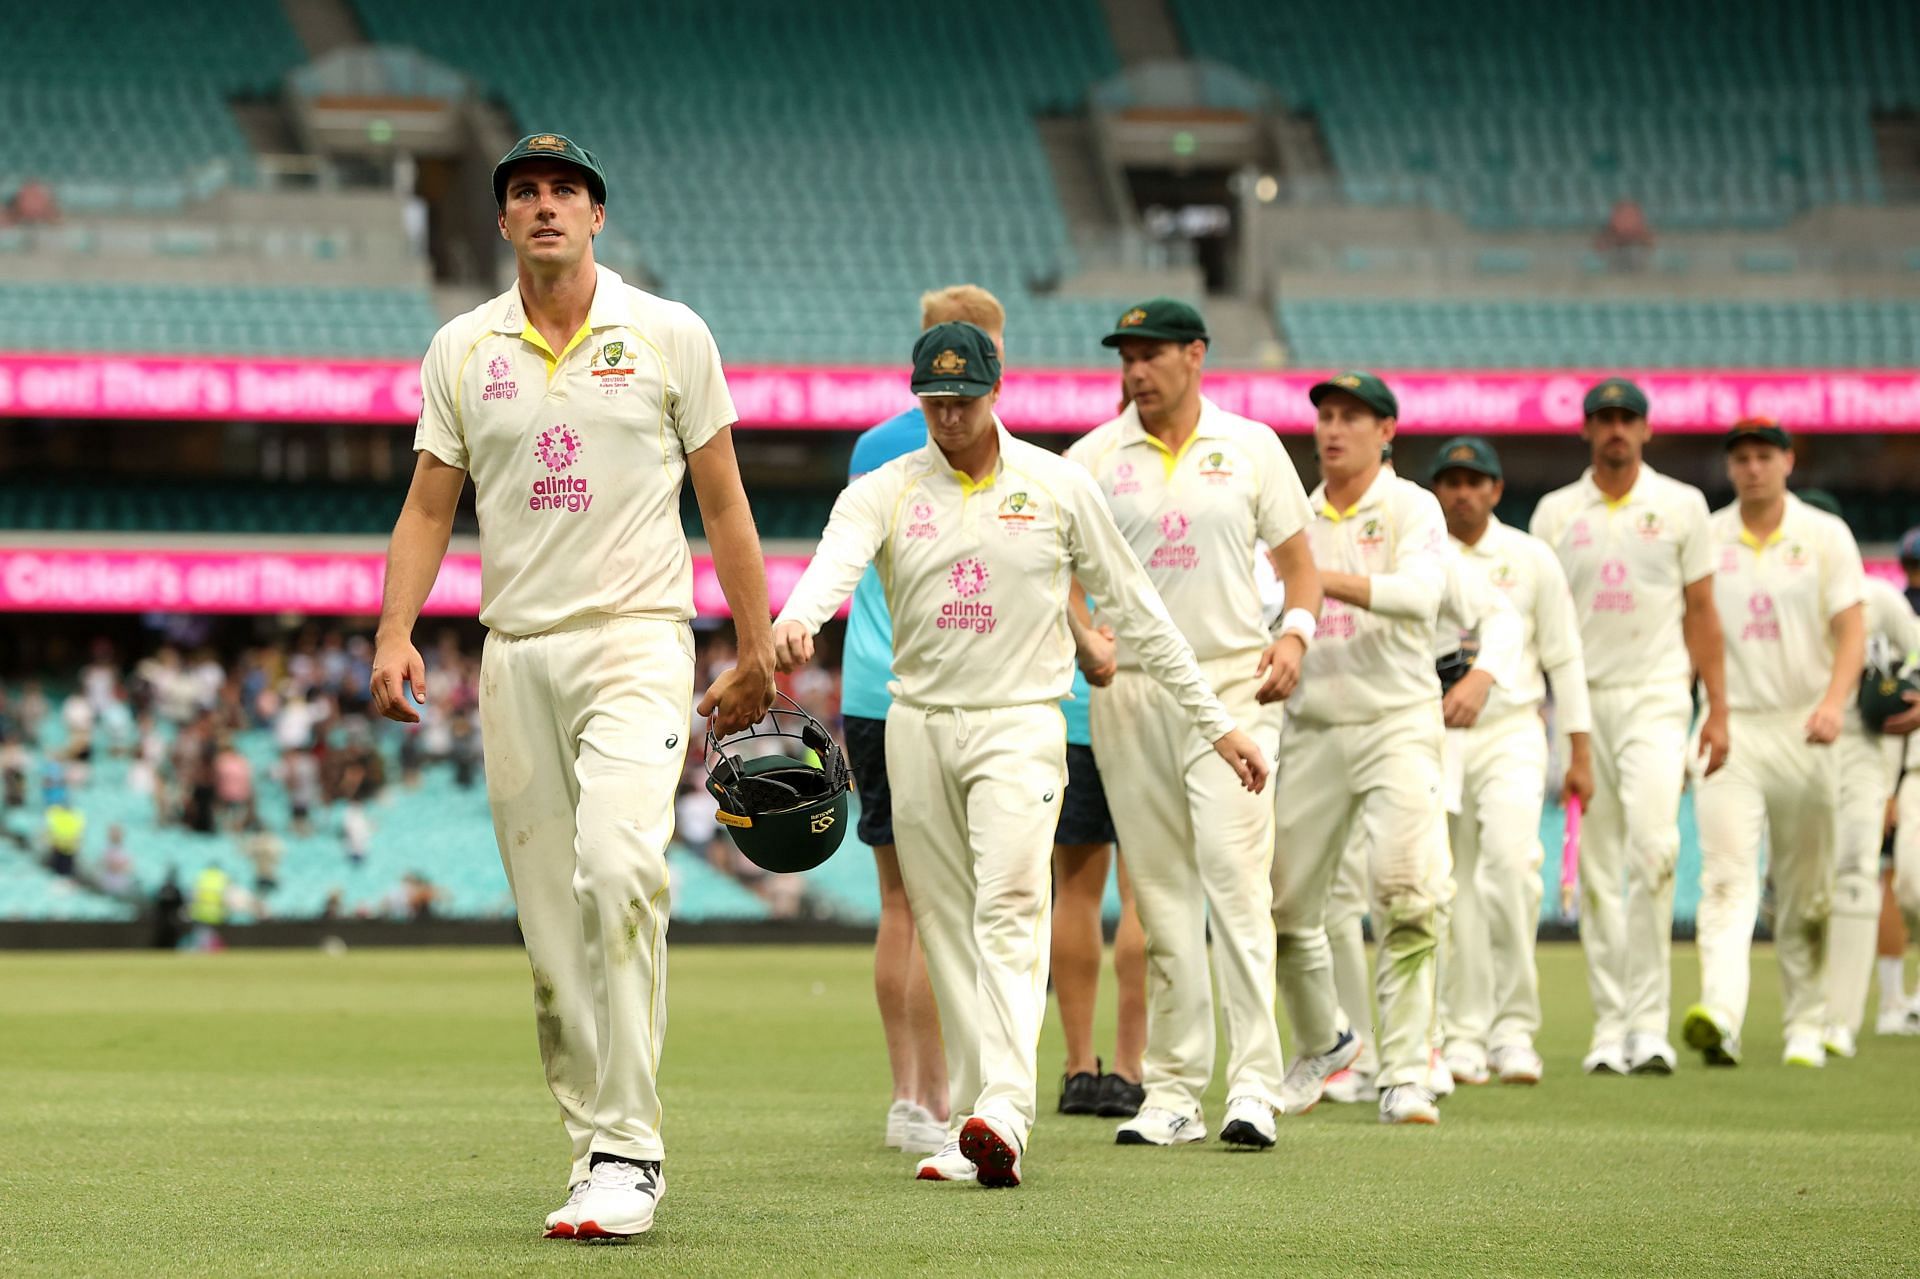 Aussie cricketers walk off after SCG Test. Pic: Getty Images